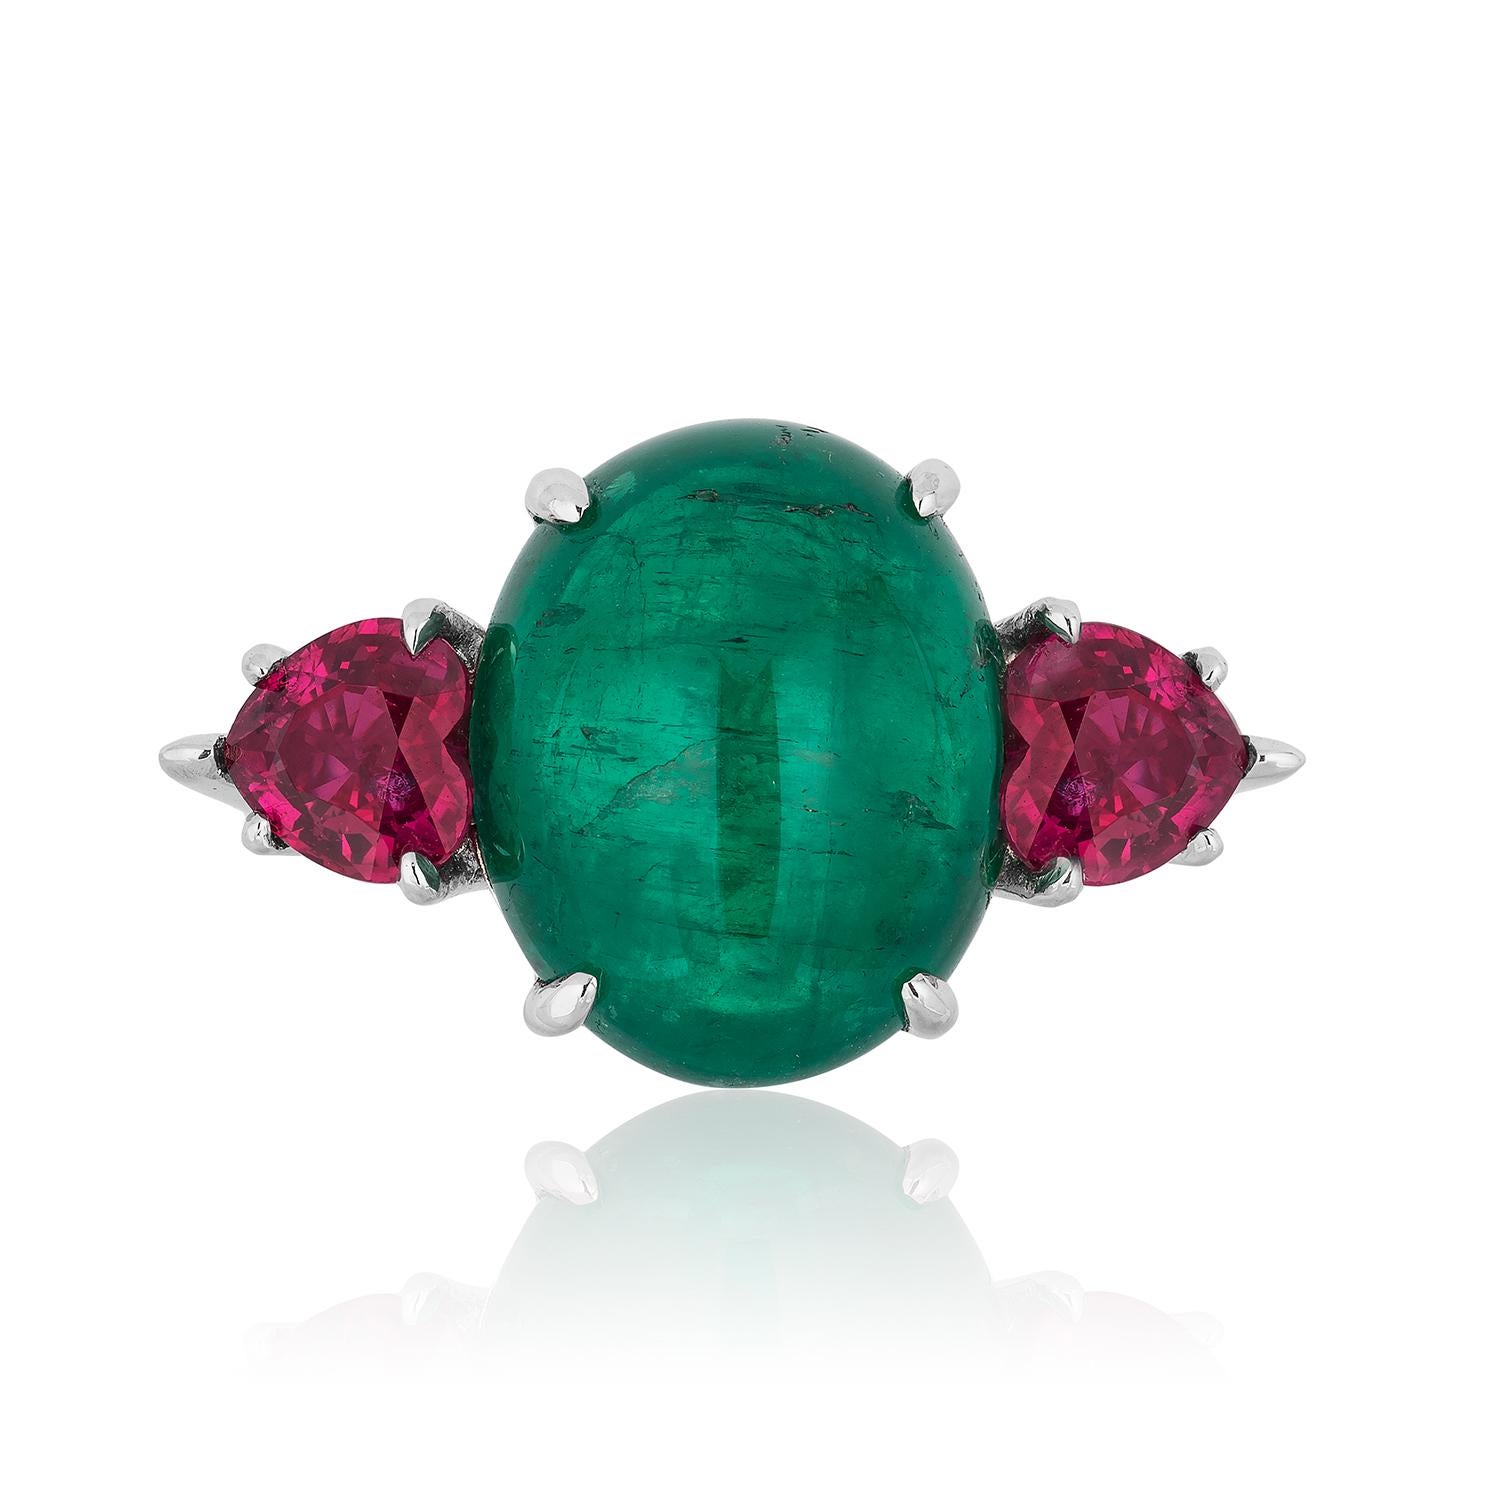 Andreoli 12.16 Carat Cabochon Colombian Emerald and Ruby Ring Platinum CDC Cert

This Andreoli ring features:

2.01ct Pair of Heart Shaped Rubies
12.16ct Emerald Colombian Cabochon CDC Certified
11.56gm Platinum

Made in the USA